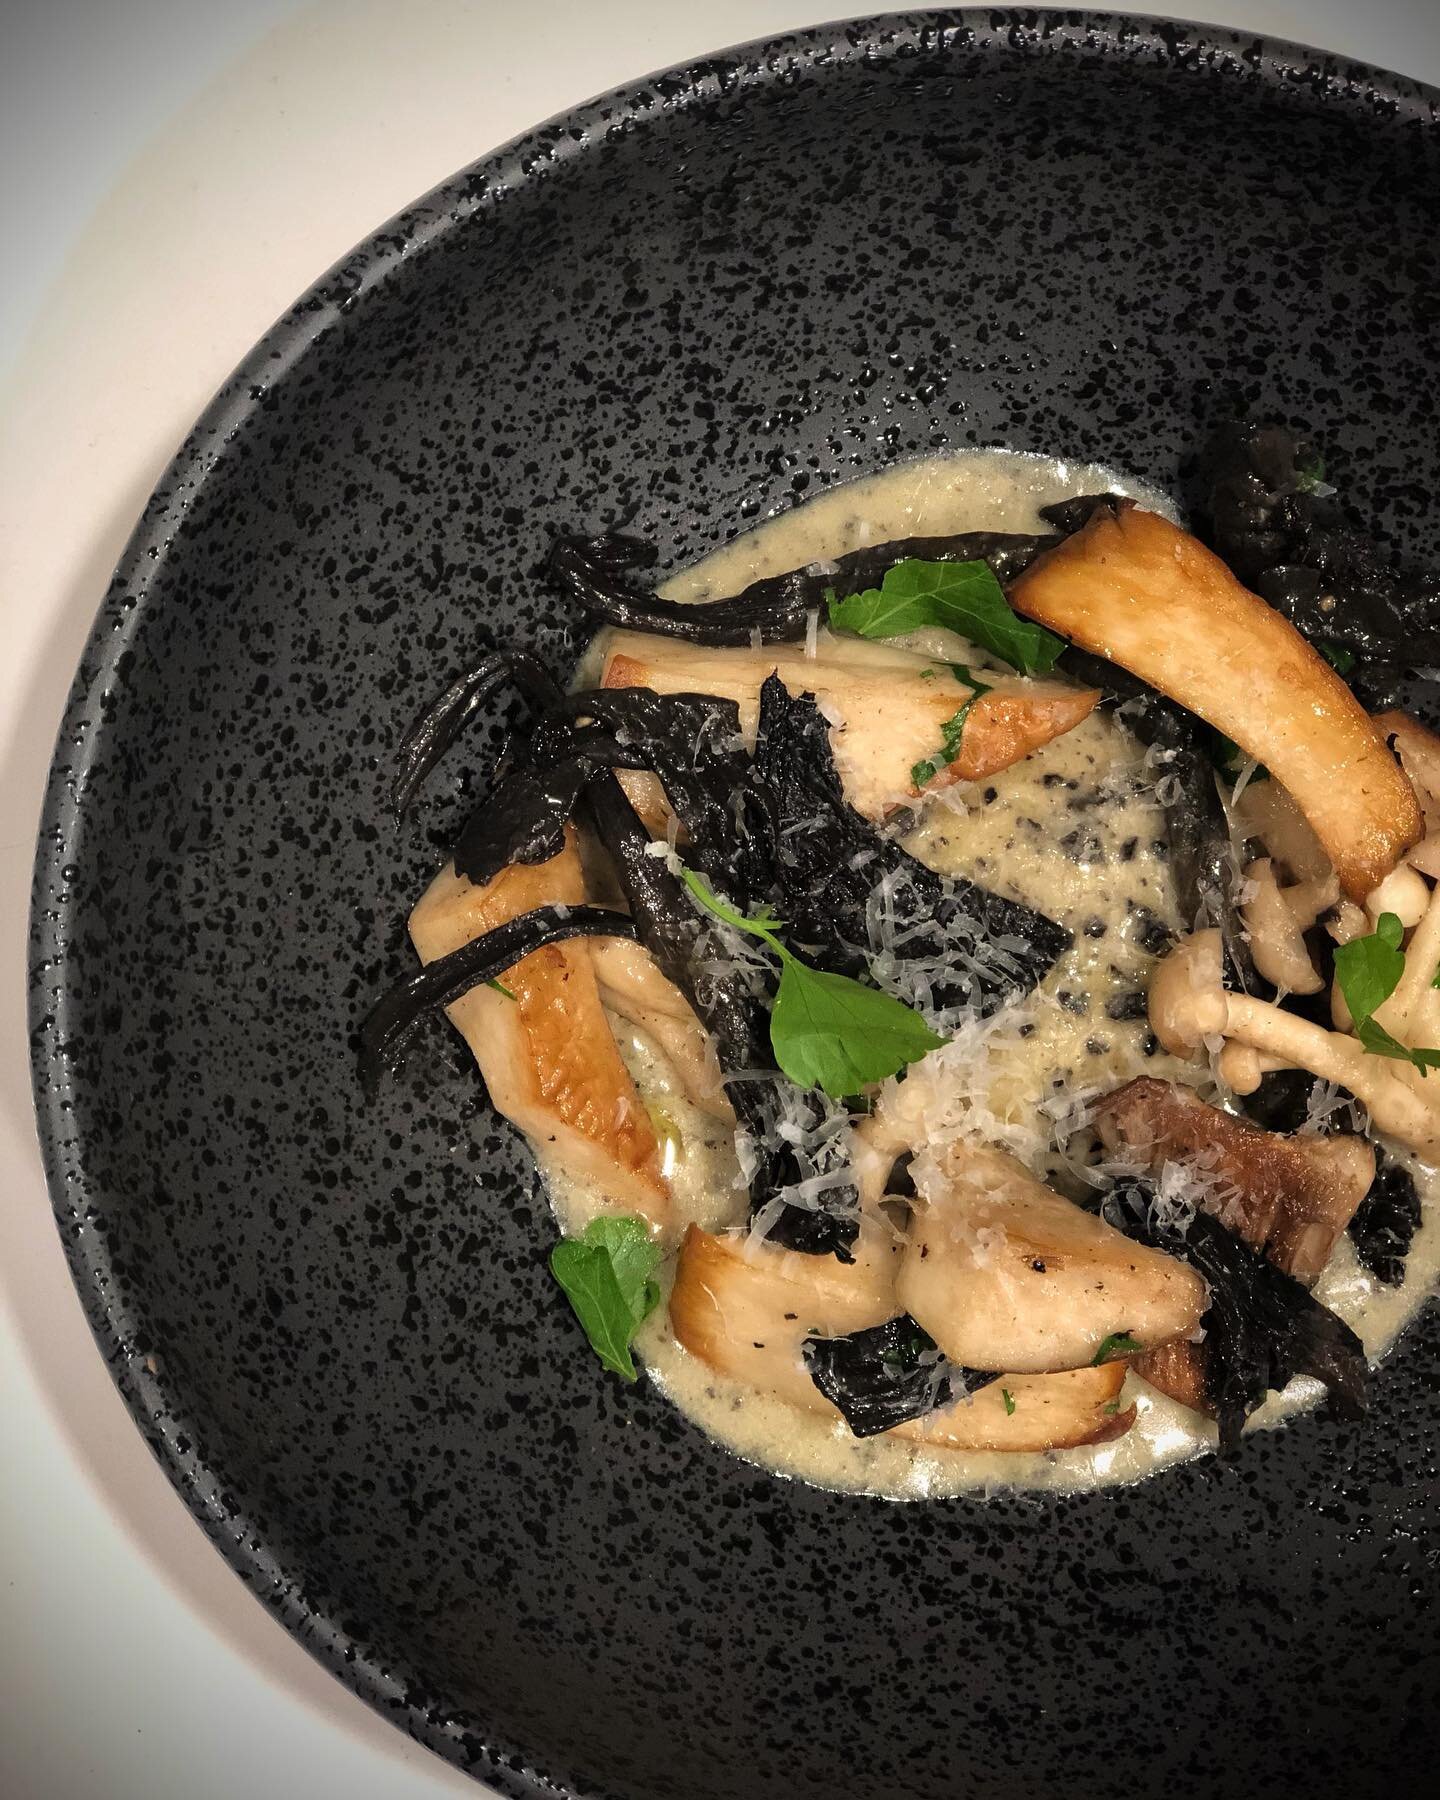 Swipe🔛 to see the wild mushrooms we used to top off our EGG YOLK RAVIOLO. That&rsquo;s right, there is a perfect egg yolk just nestled right in between those fresh pasta sheets covered in fresh black truffle sauce 🤤 
.
.
.
.
.
#chefandthehost  #pri